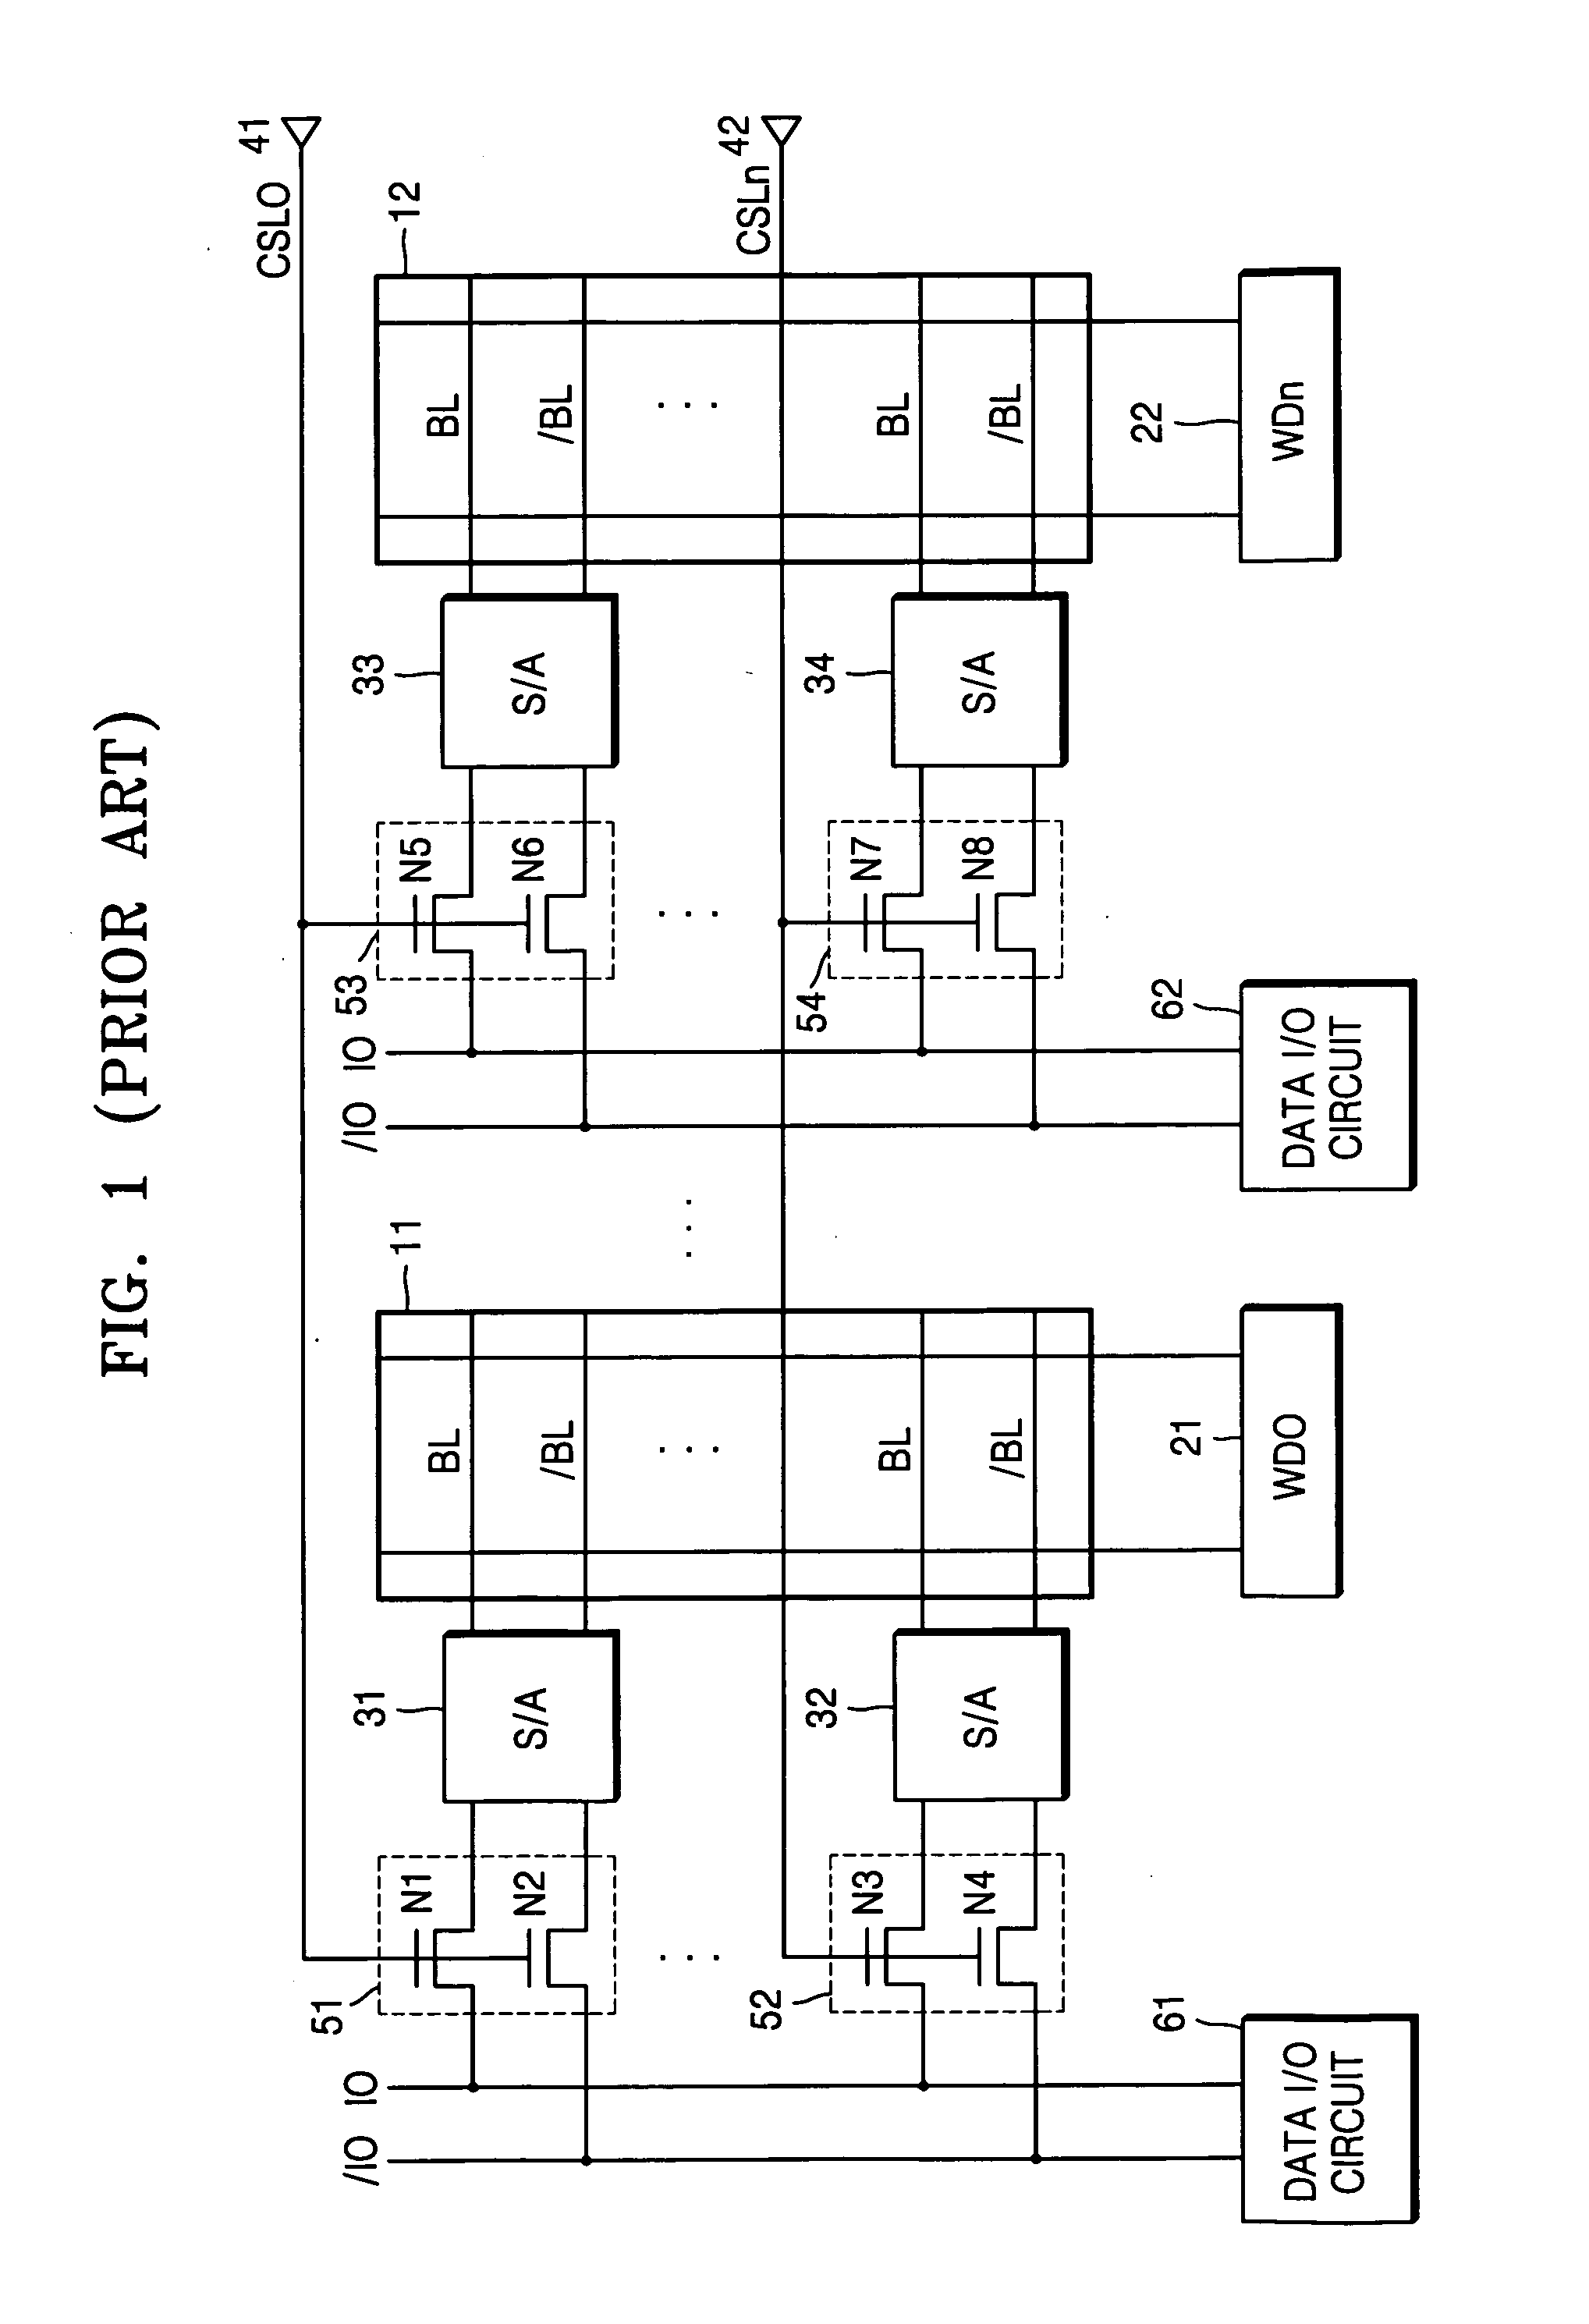 Semiconductor memory device having improved column selection lines and method of driving the same